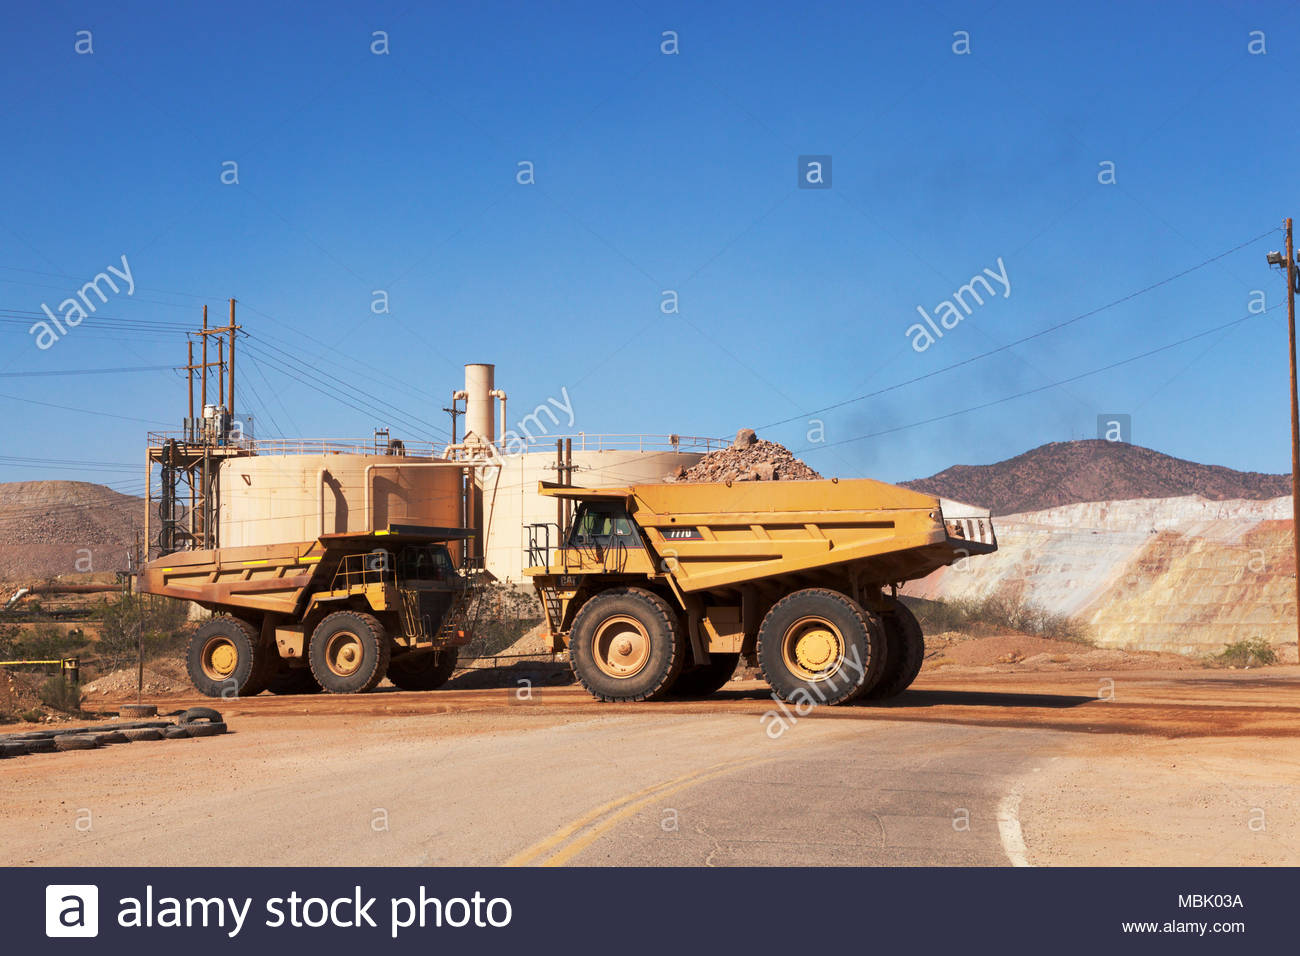 Two mine haul trucks, Caterpillar 777D, 100 tons payload capacity